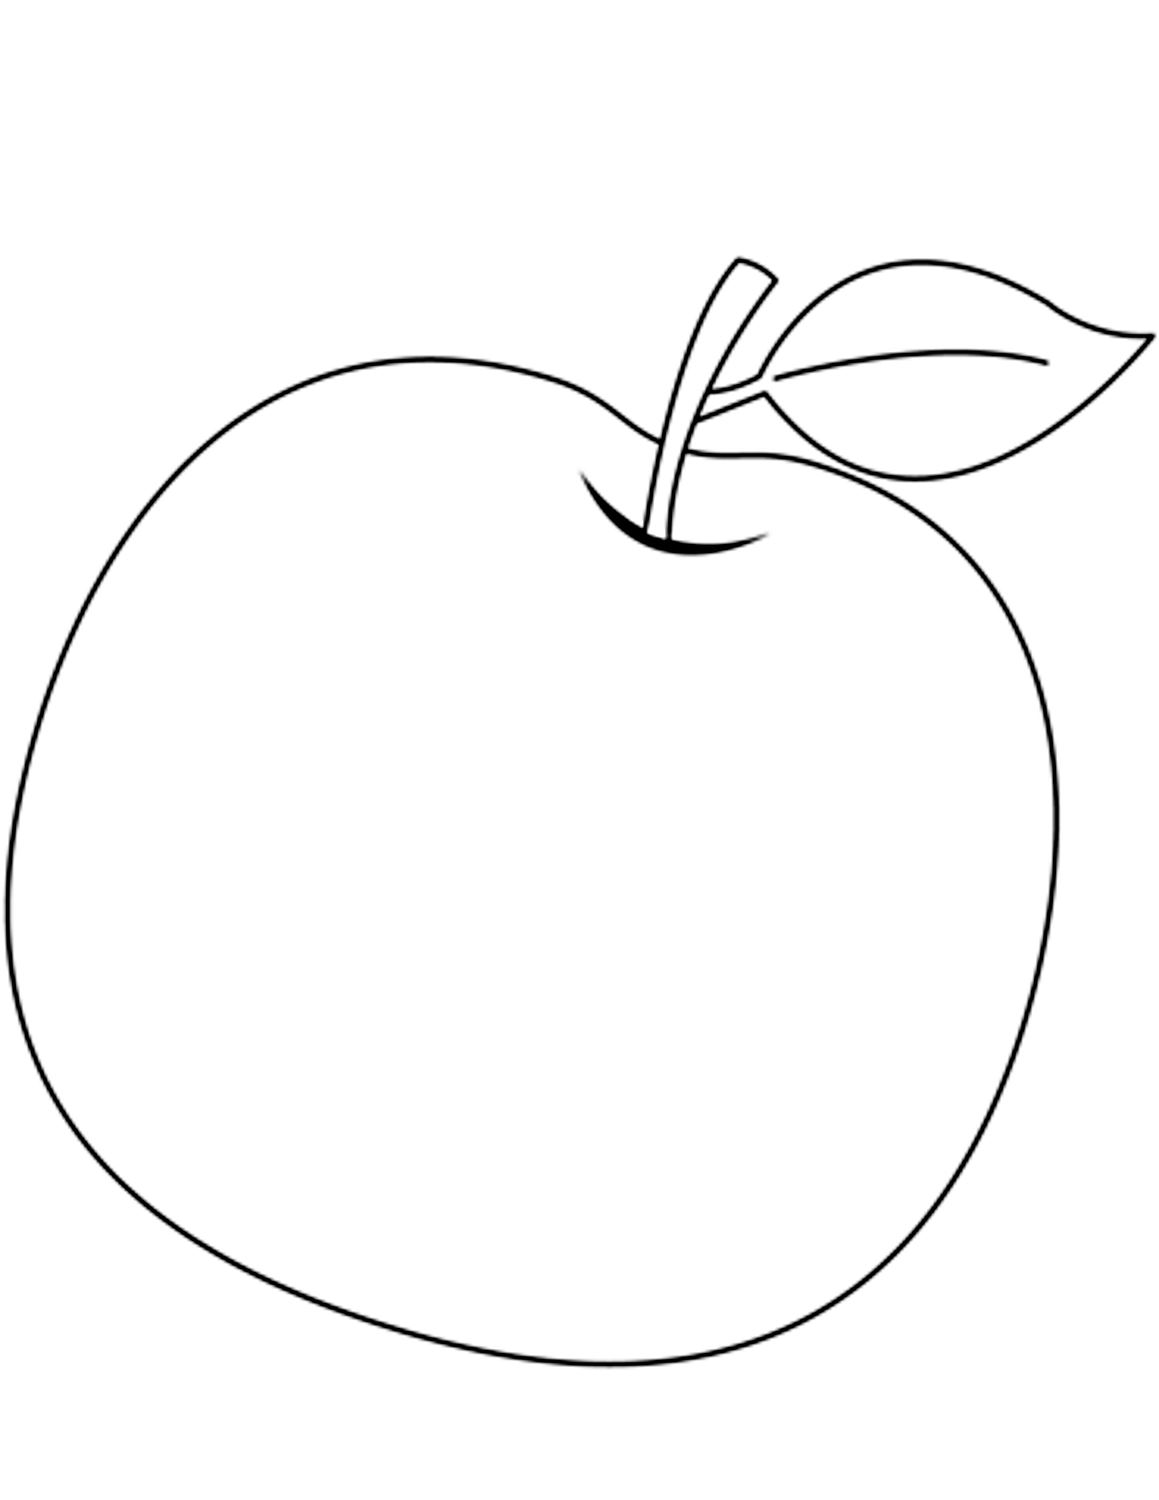 Apple 18  coloring page to print and coloring